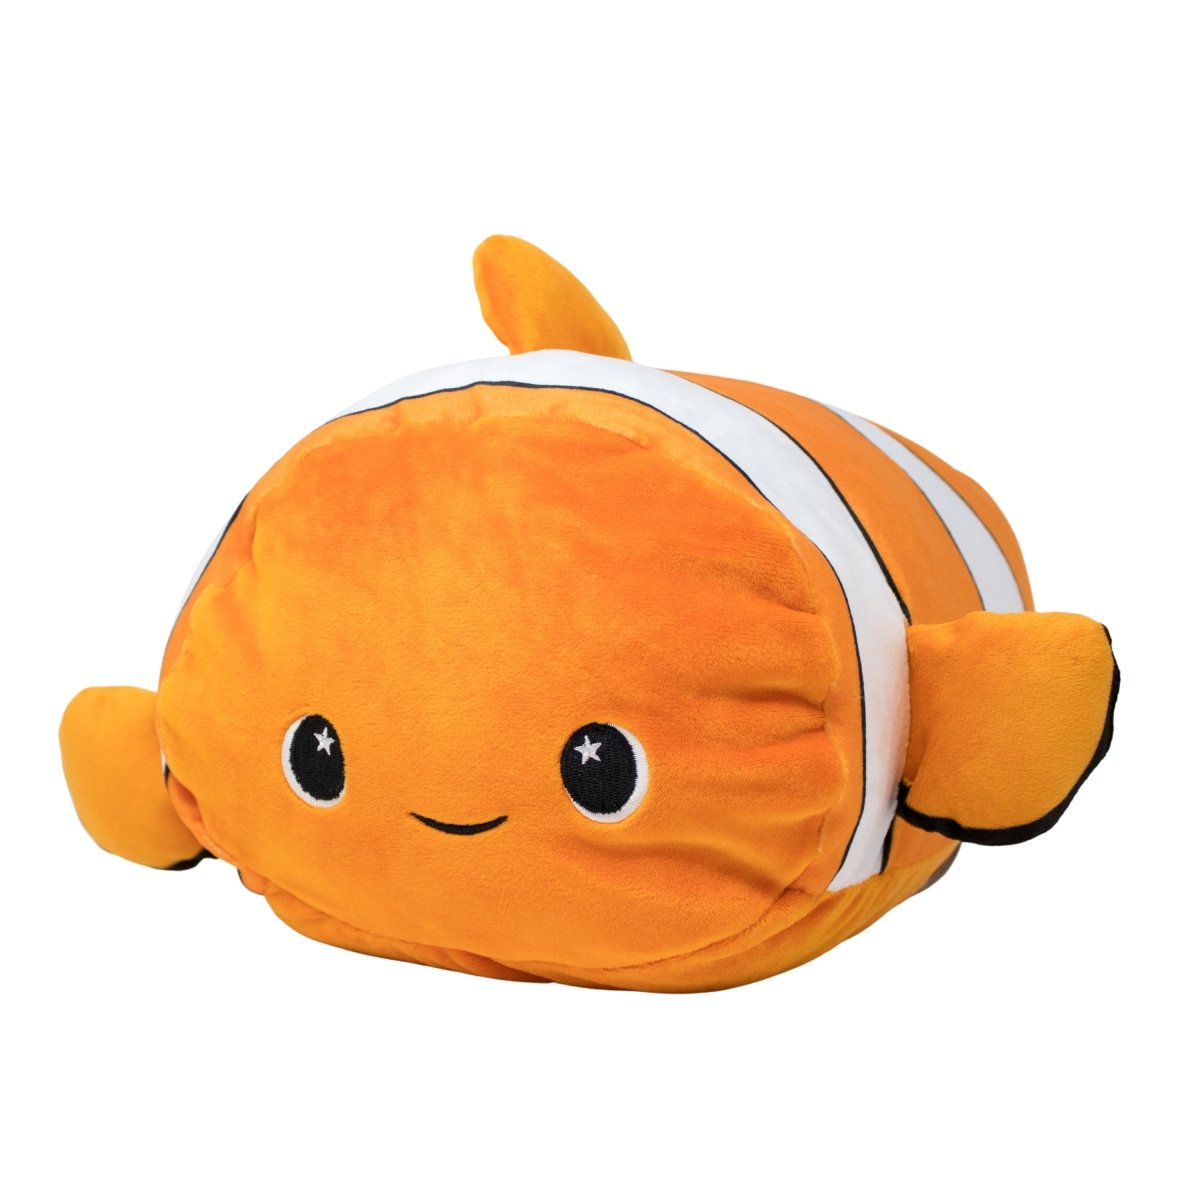 Finster the Clown Fish Plushie